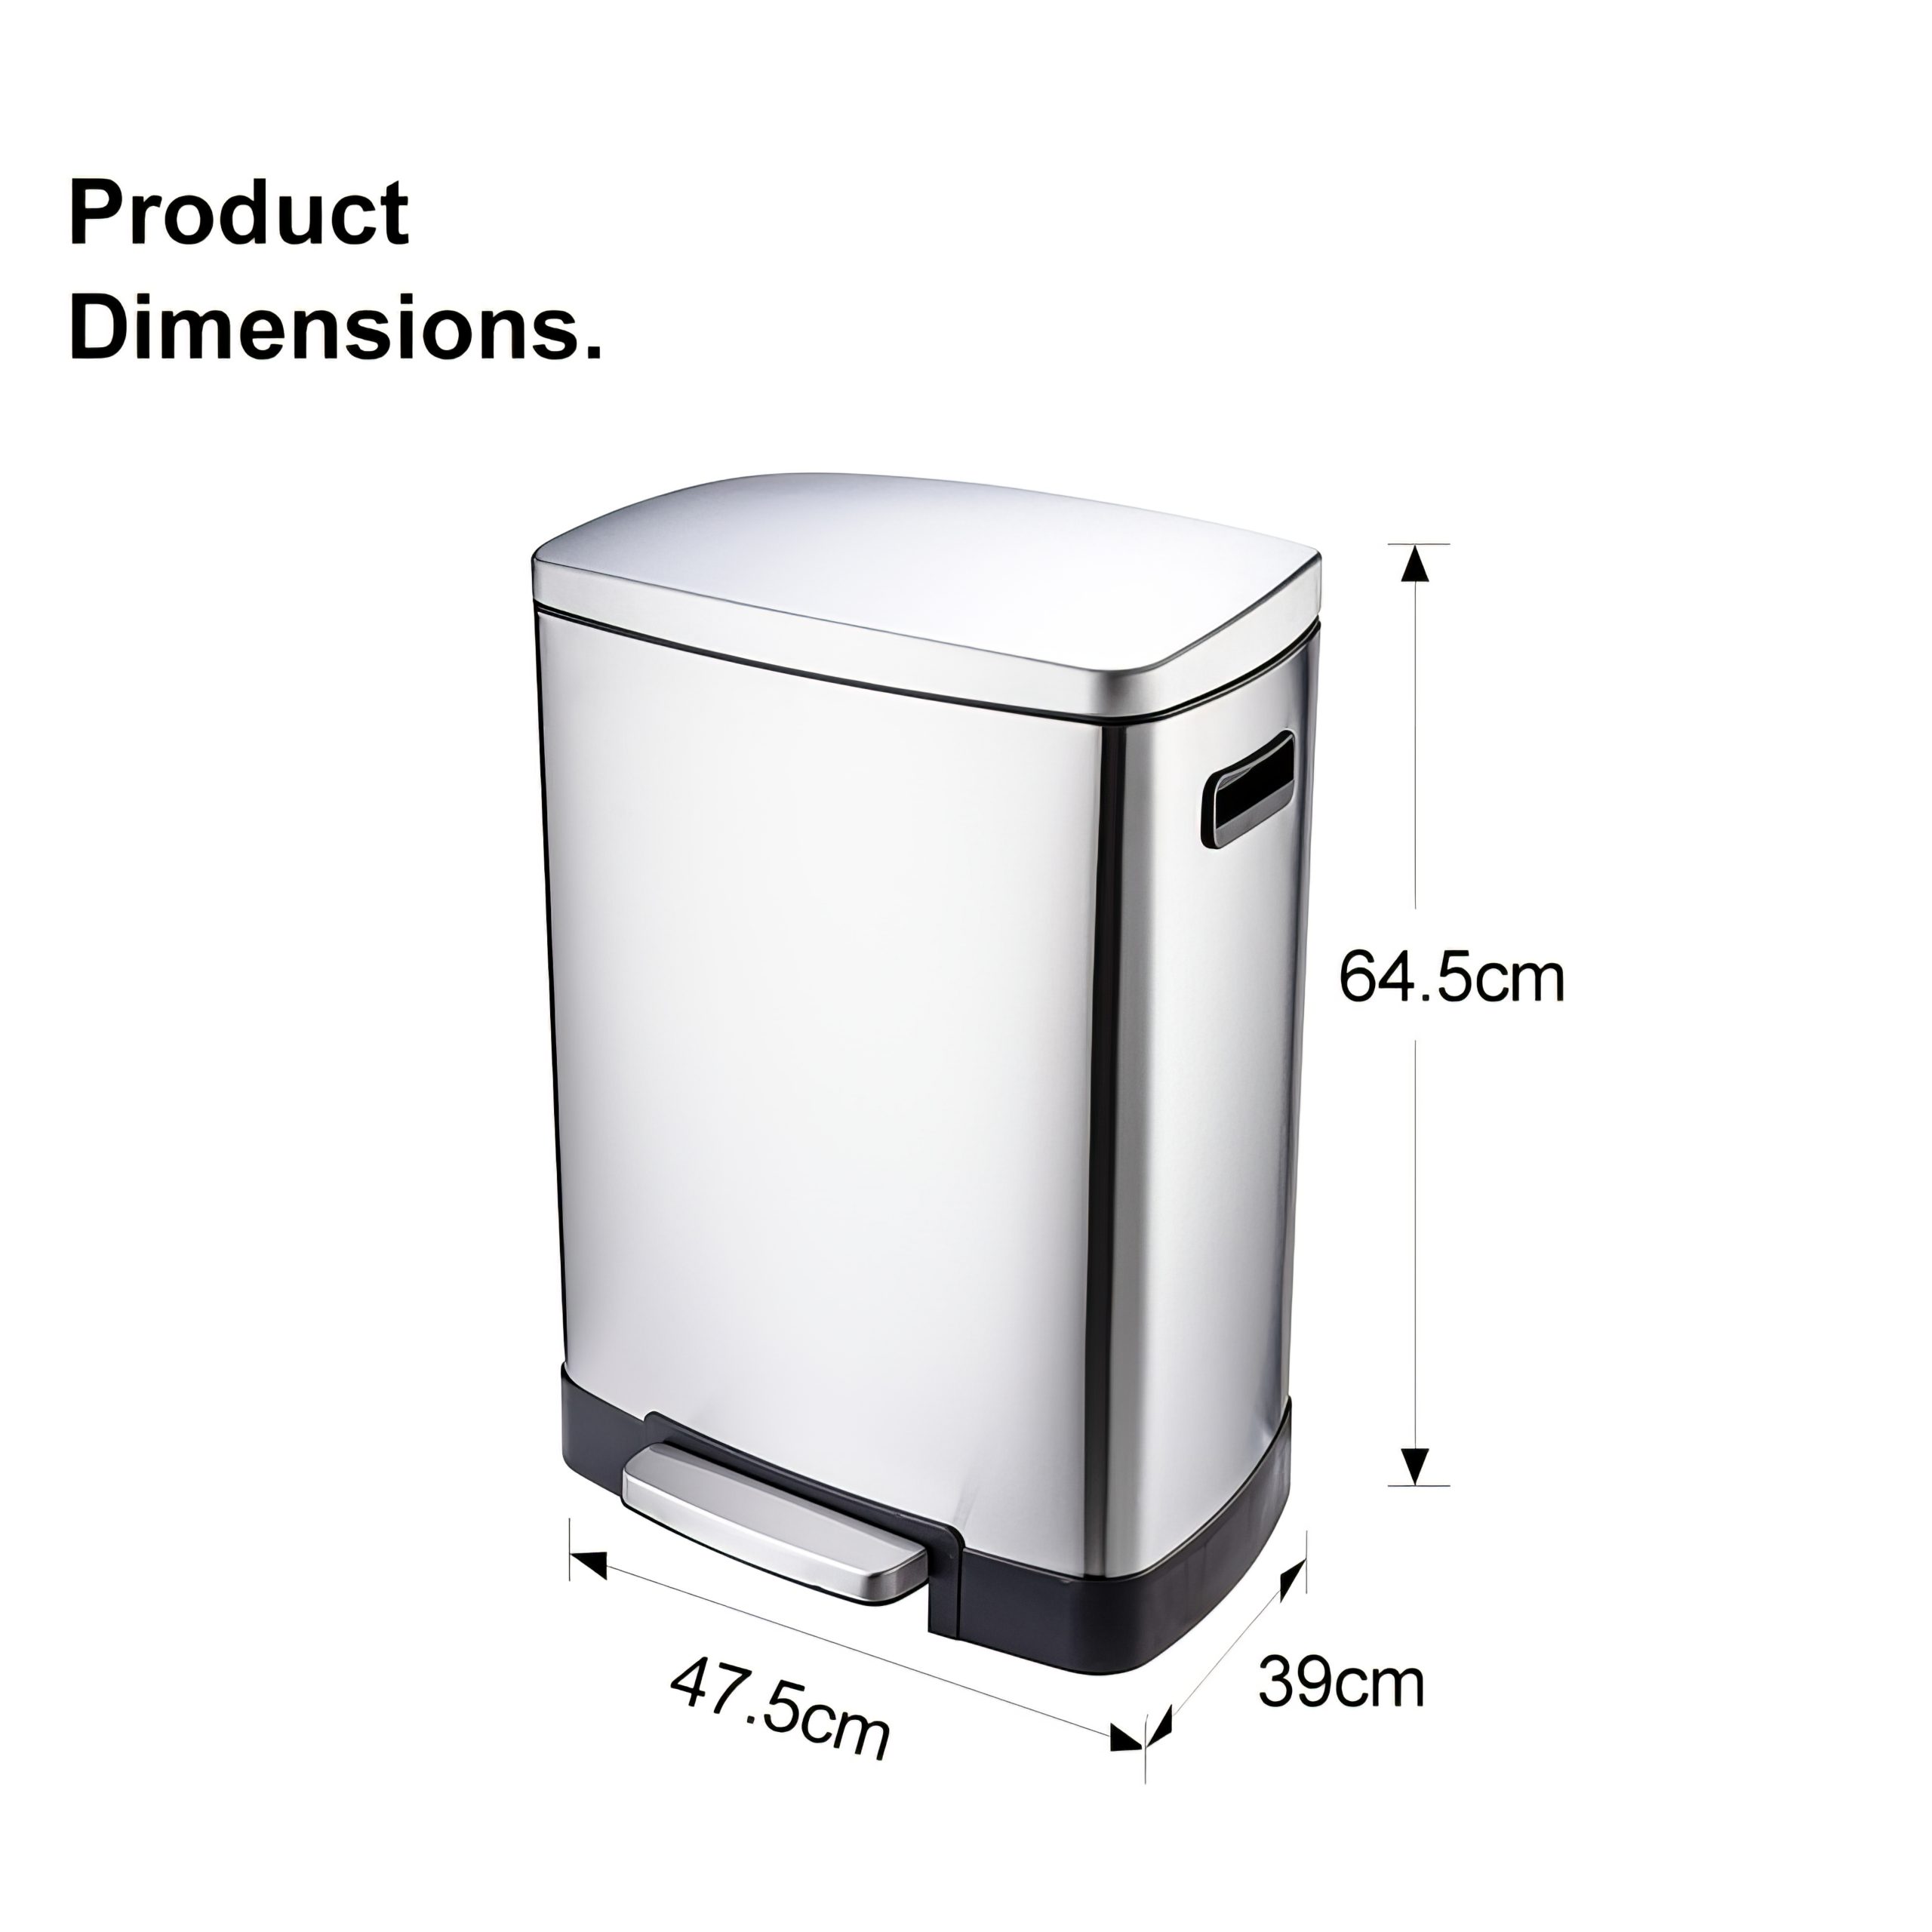 2-Compartment-Pedal-Bin-15-25L_Image_Dimensions-scaled-1.jpg